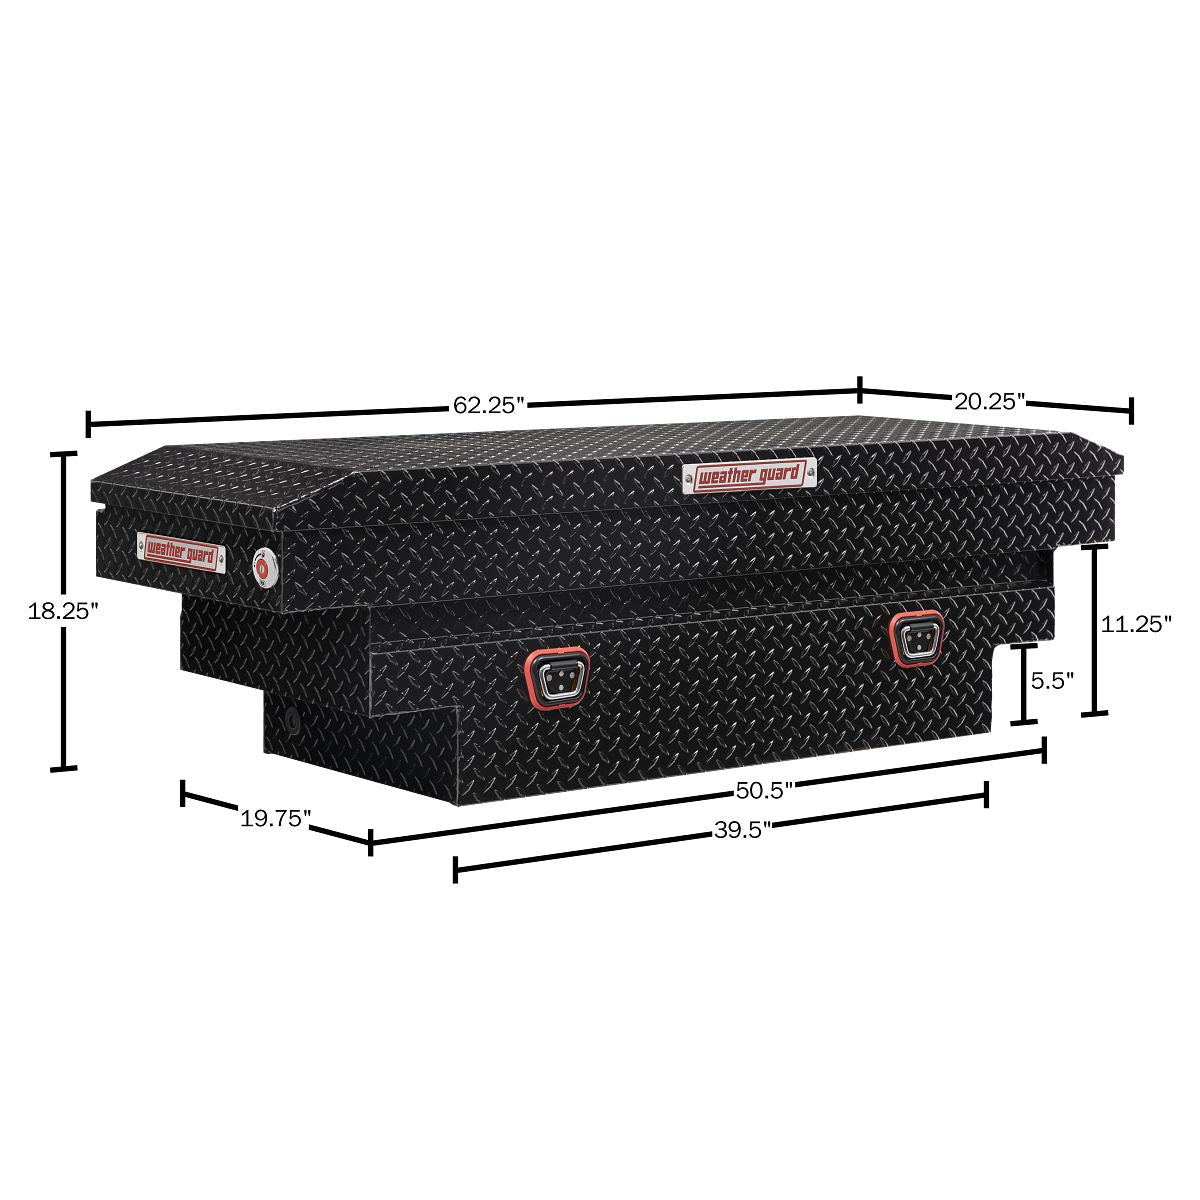 Weather Guard 62" Crossover Toolbox Gloss Black Compact Deep (137-5-04)